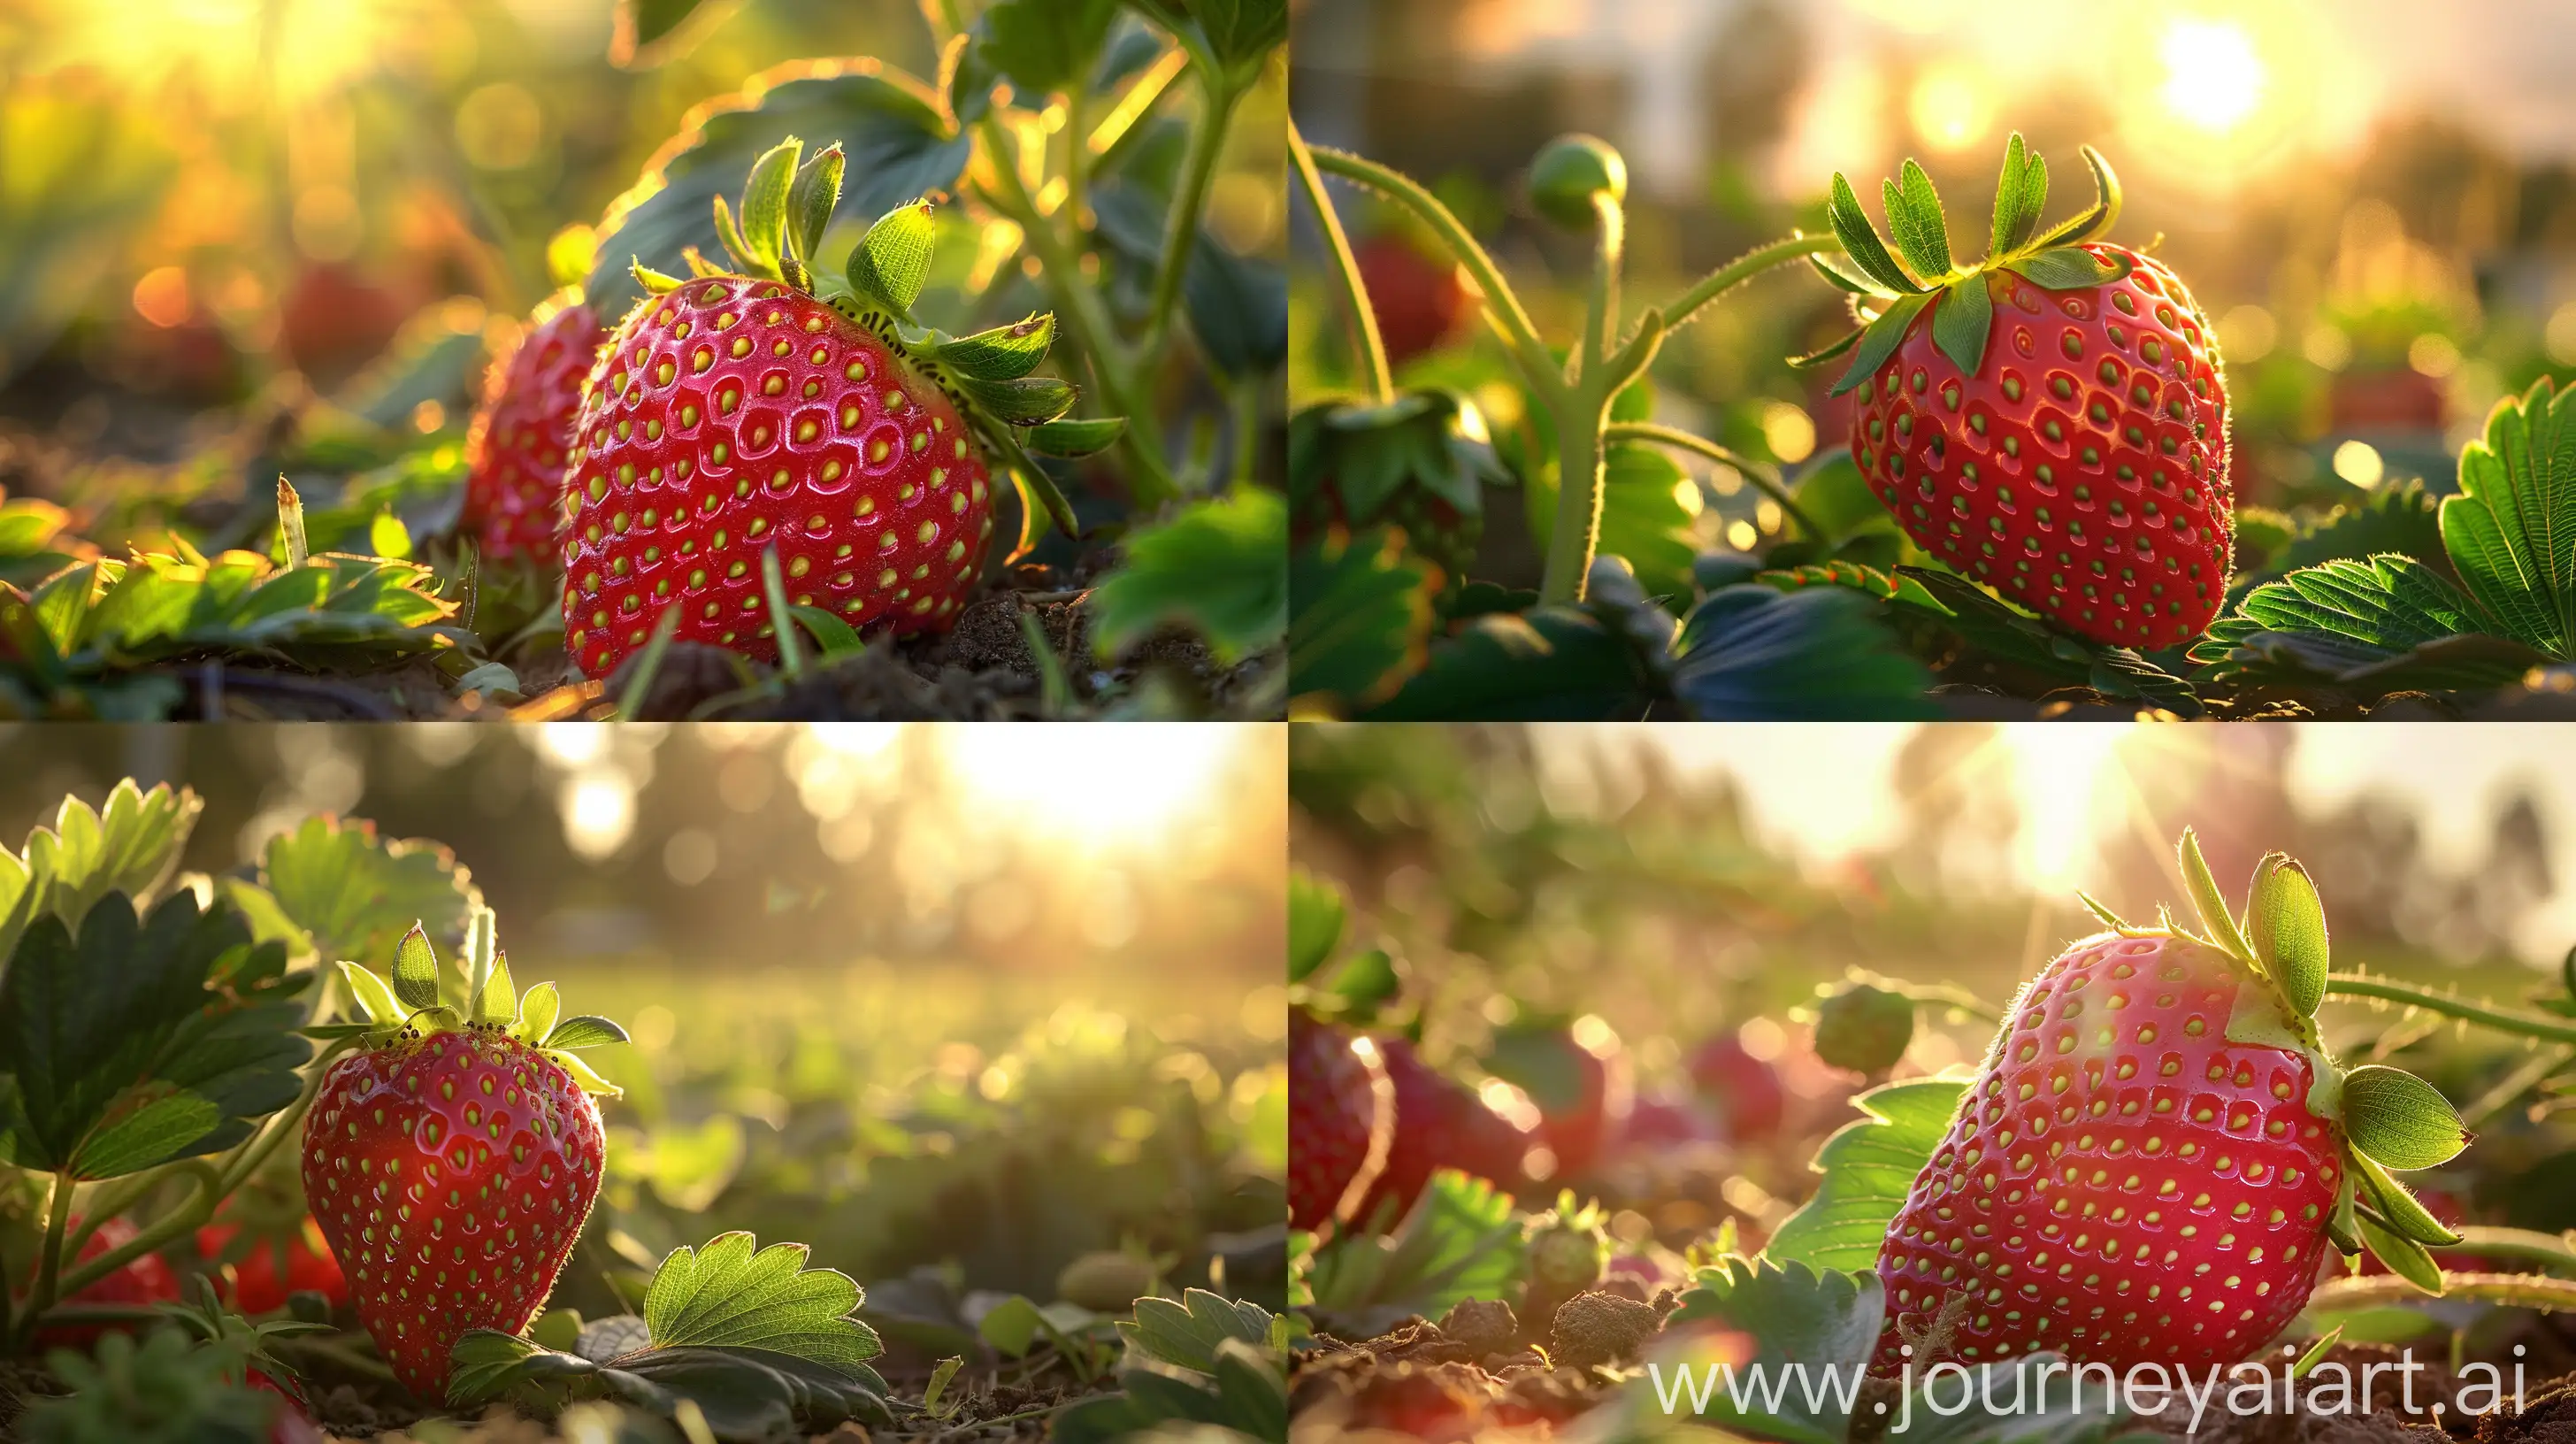 High detailed photo capturing a Strawberry, Chandler. The sun, casting a warm, golden glow, bathes the scene in a serene ambiance, illuminating the intricate details of each element. The composition centers on a Strawberry, Chandler. These early midseason June-bearing strawberries are a good choice for fresh pickings of homegrown, bright red, flavorful fruit. Firm, large and beautifully shaped, these berries are especially appealing in fresh fruit trays.. The image evokes a sense of tranquility and natural beauty, inviting viewers to immerse themselves in the splendor of the landscape. --ar 16:9 